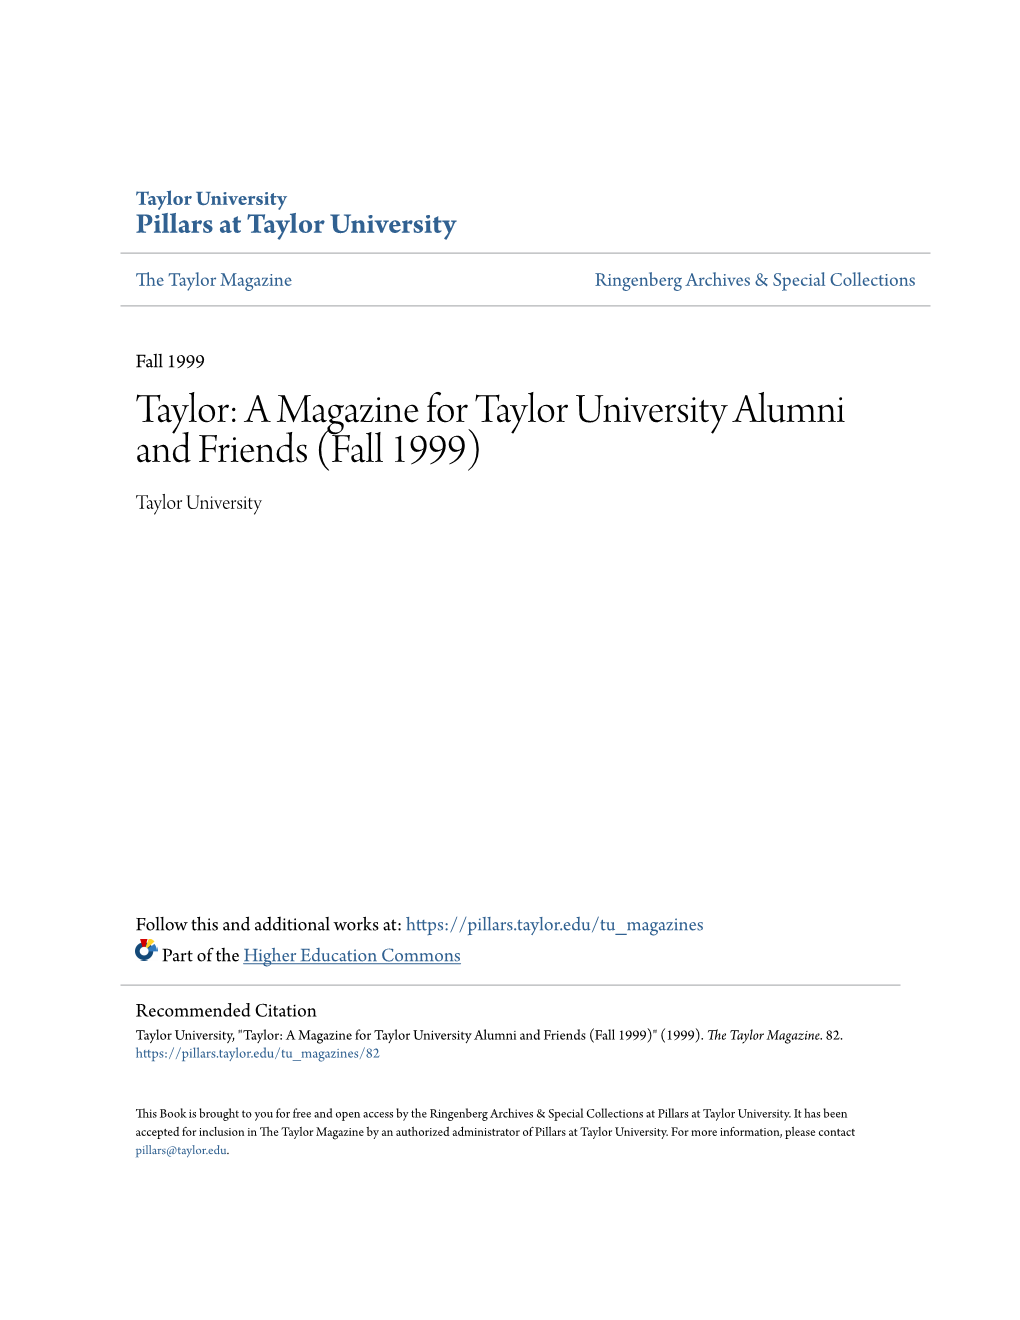 A Magazine for Taylor University Alumni and Friends (Fall 1999) Taylor University